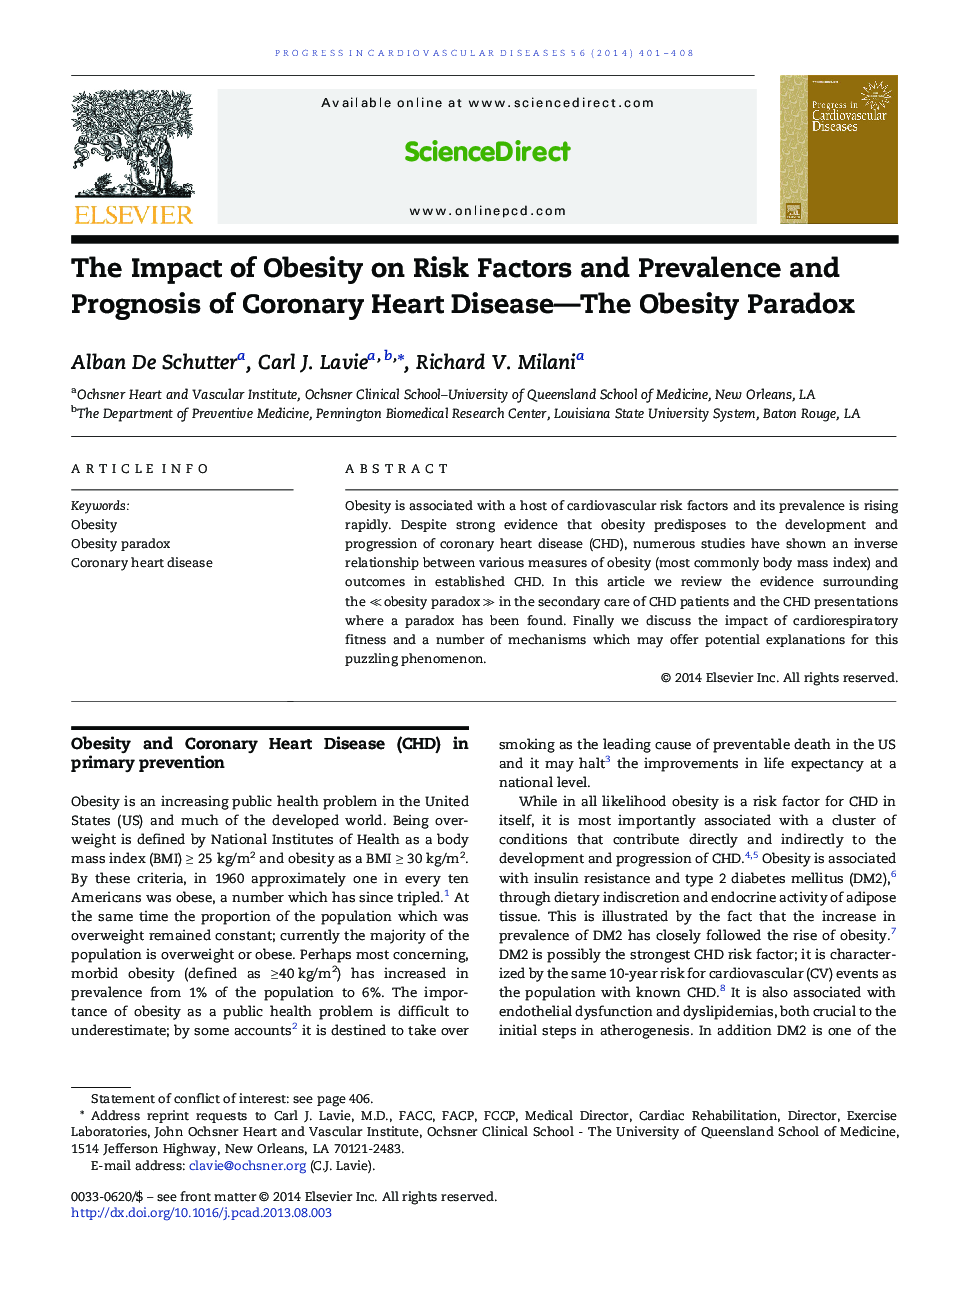 The Impact of Obesity on Risk Factors and Prevalence and Prognosis of Coronary Heart Disease—The Obesity Paradox 